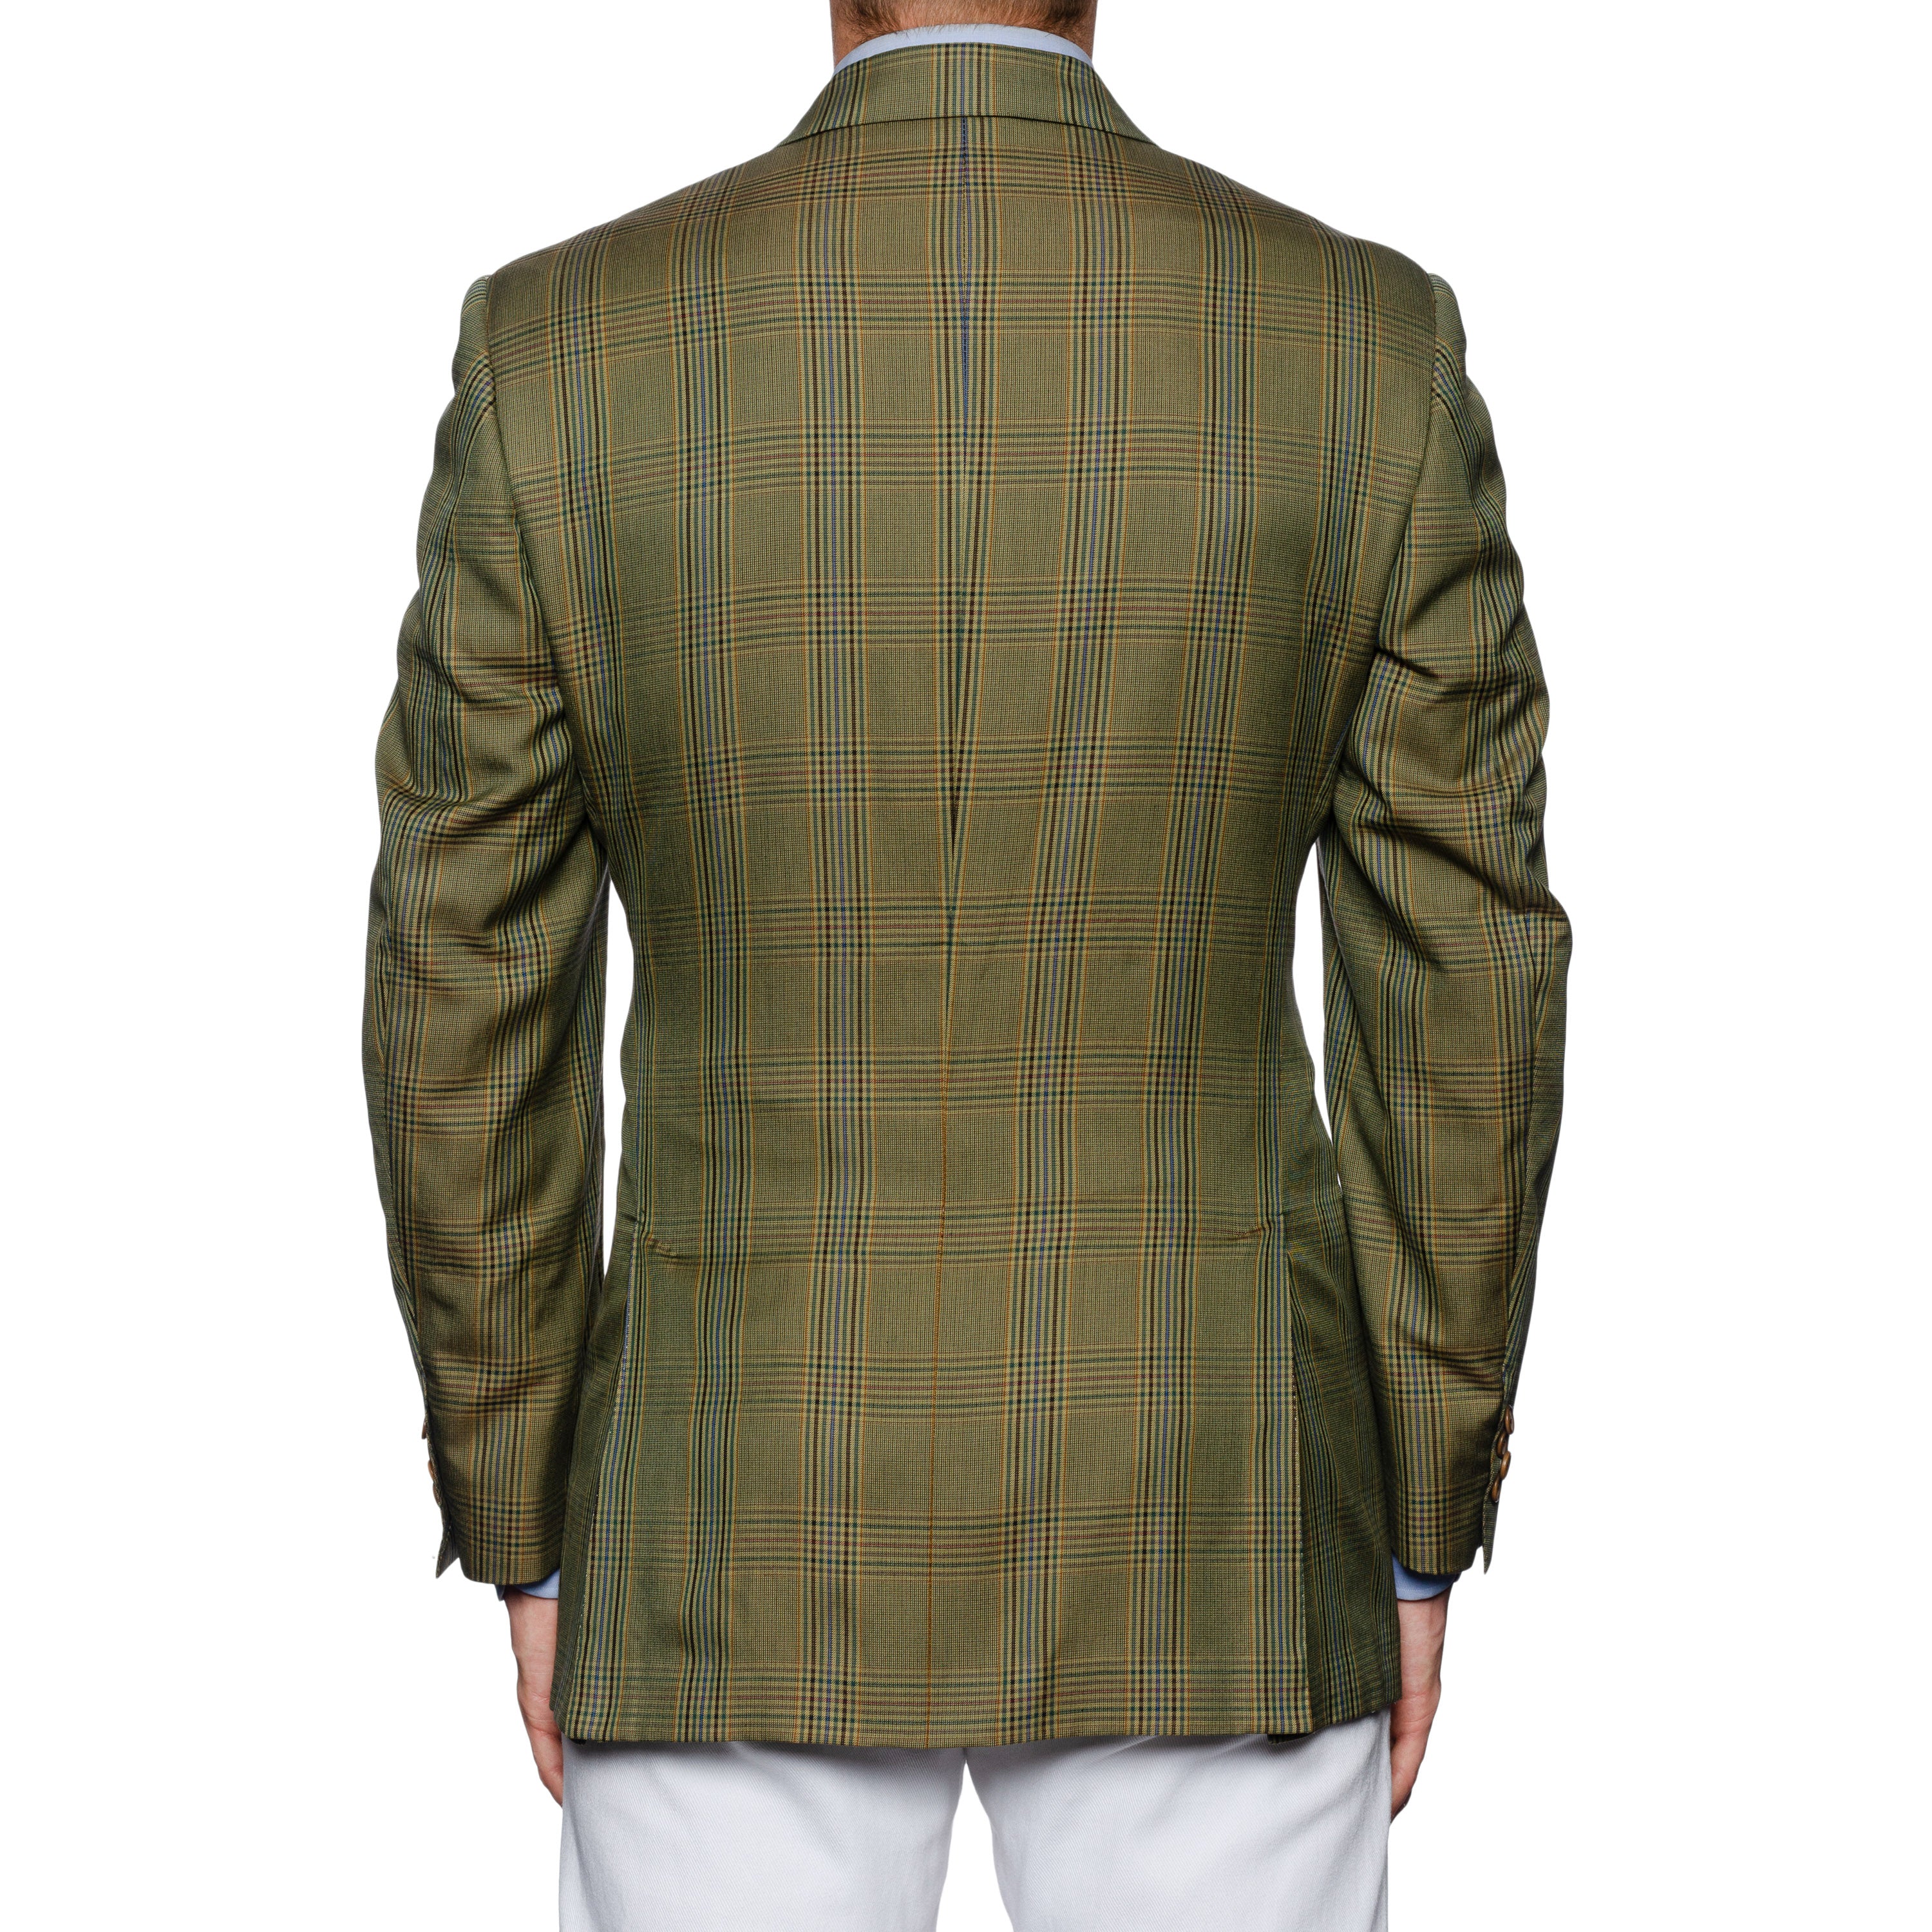 CASTANGIA 1850 Olive Prince of Wales Wool Super 100's Jacket EU 50 NEW US 40 CASTANGIA